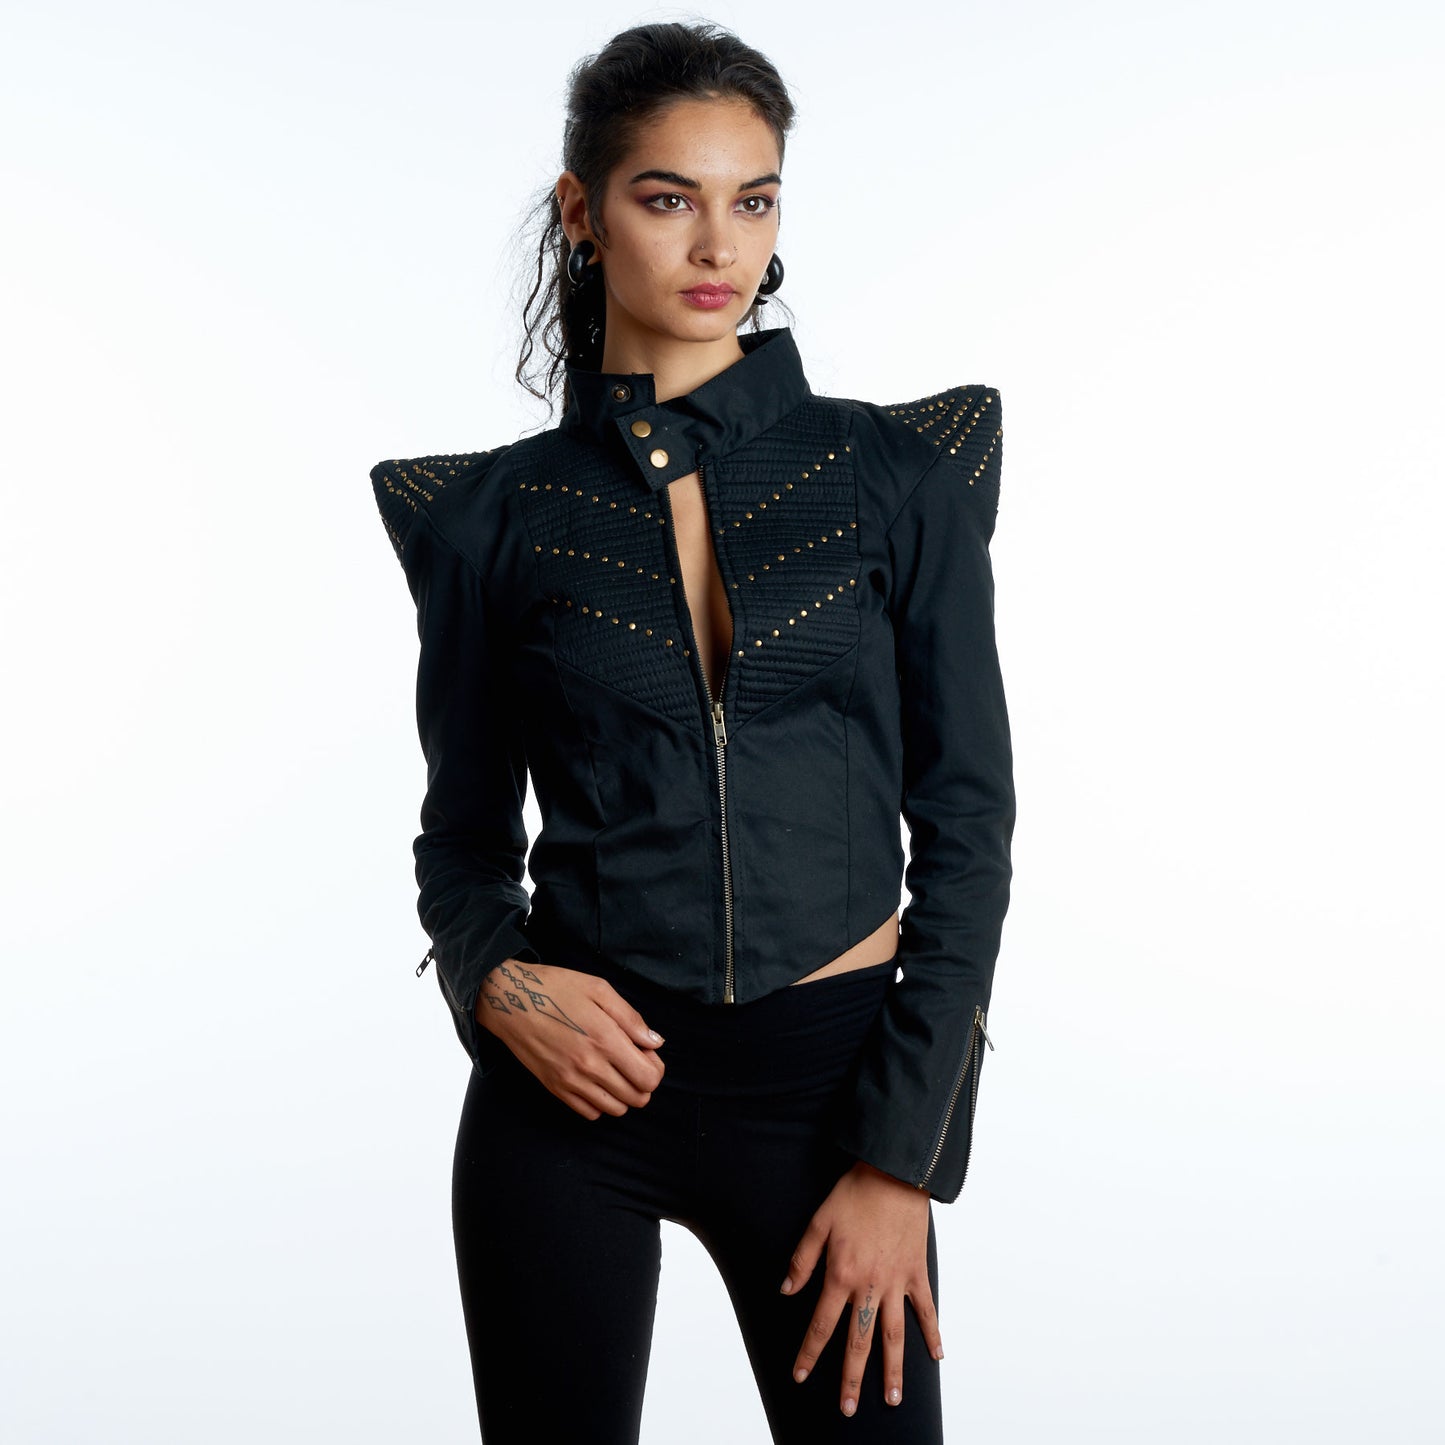 Women's Bowie Jacket (leather or canvas)